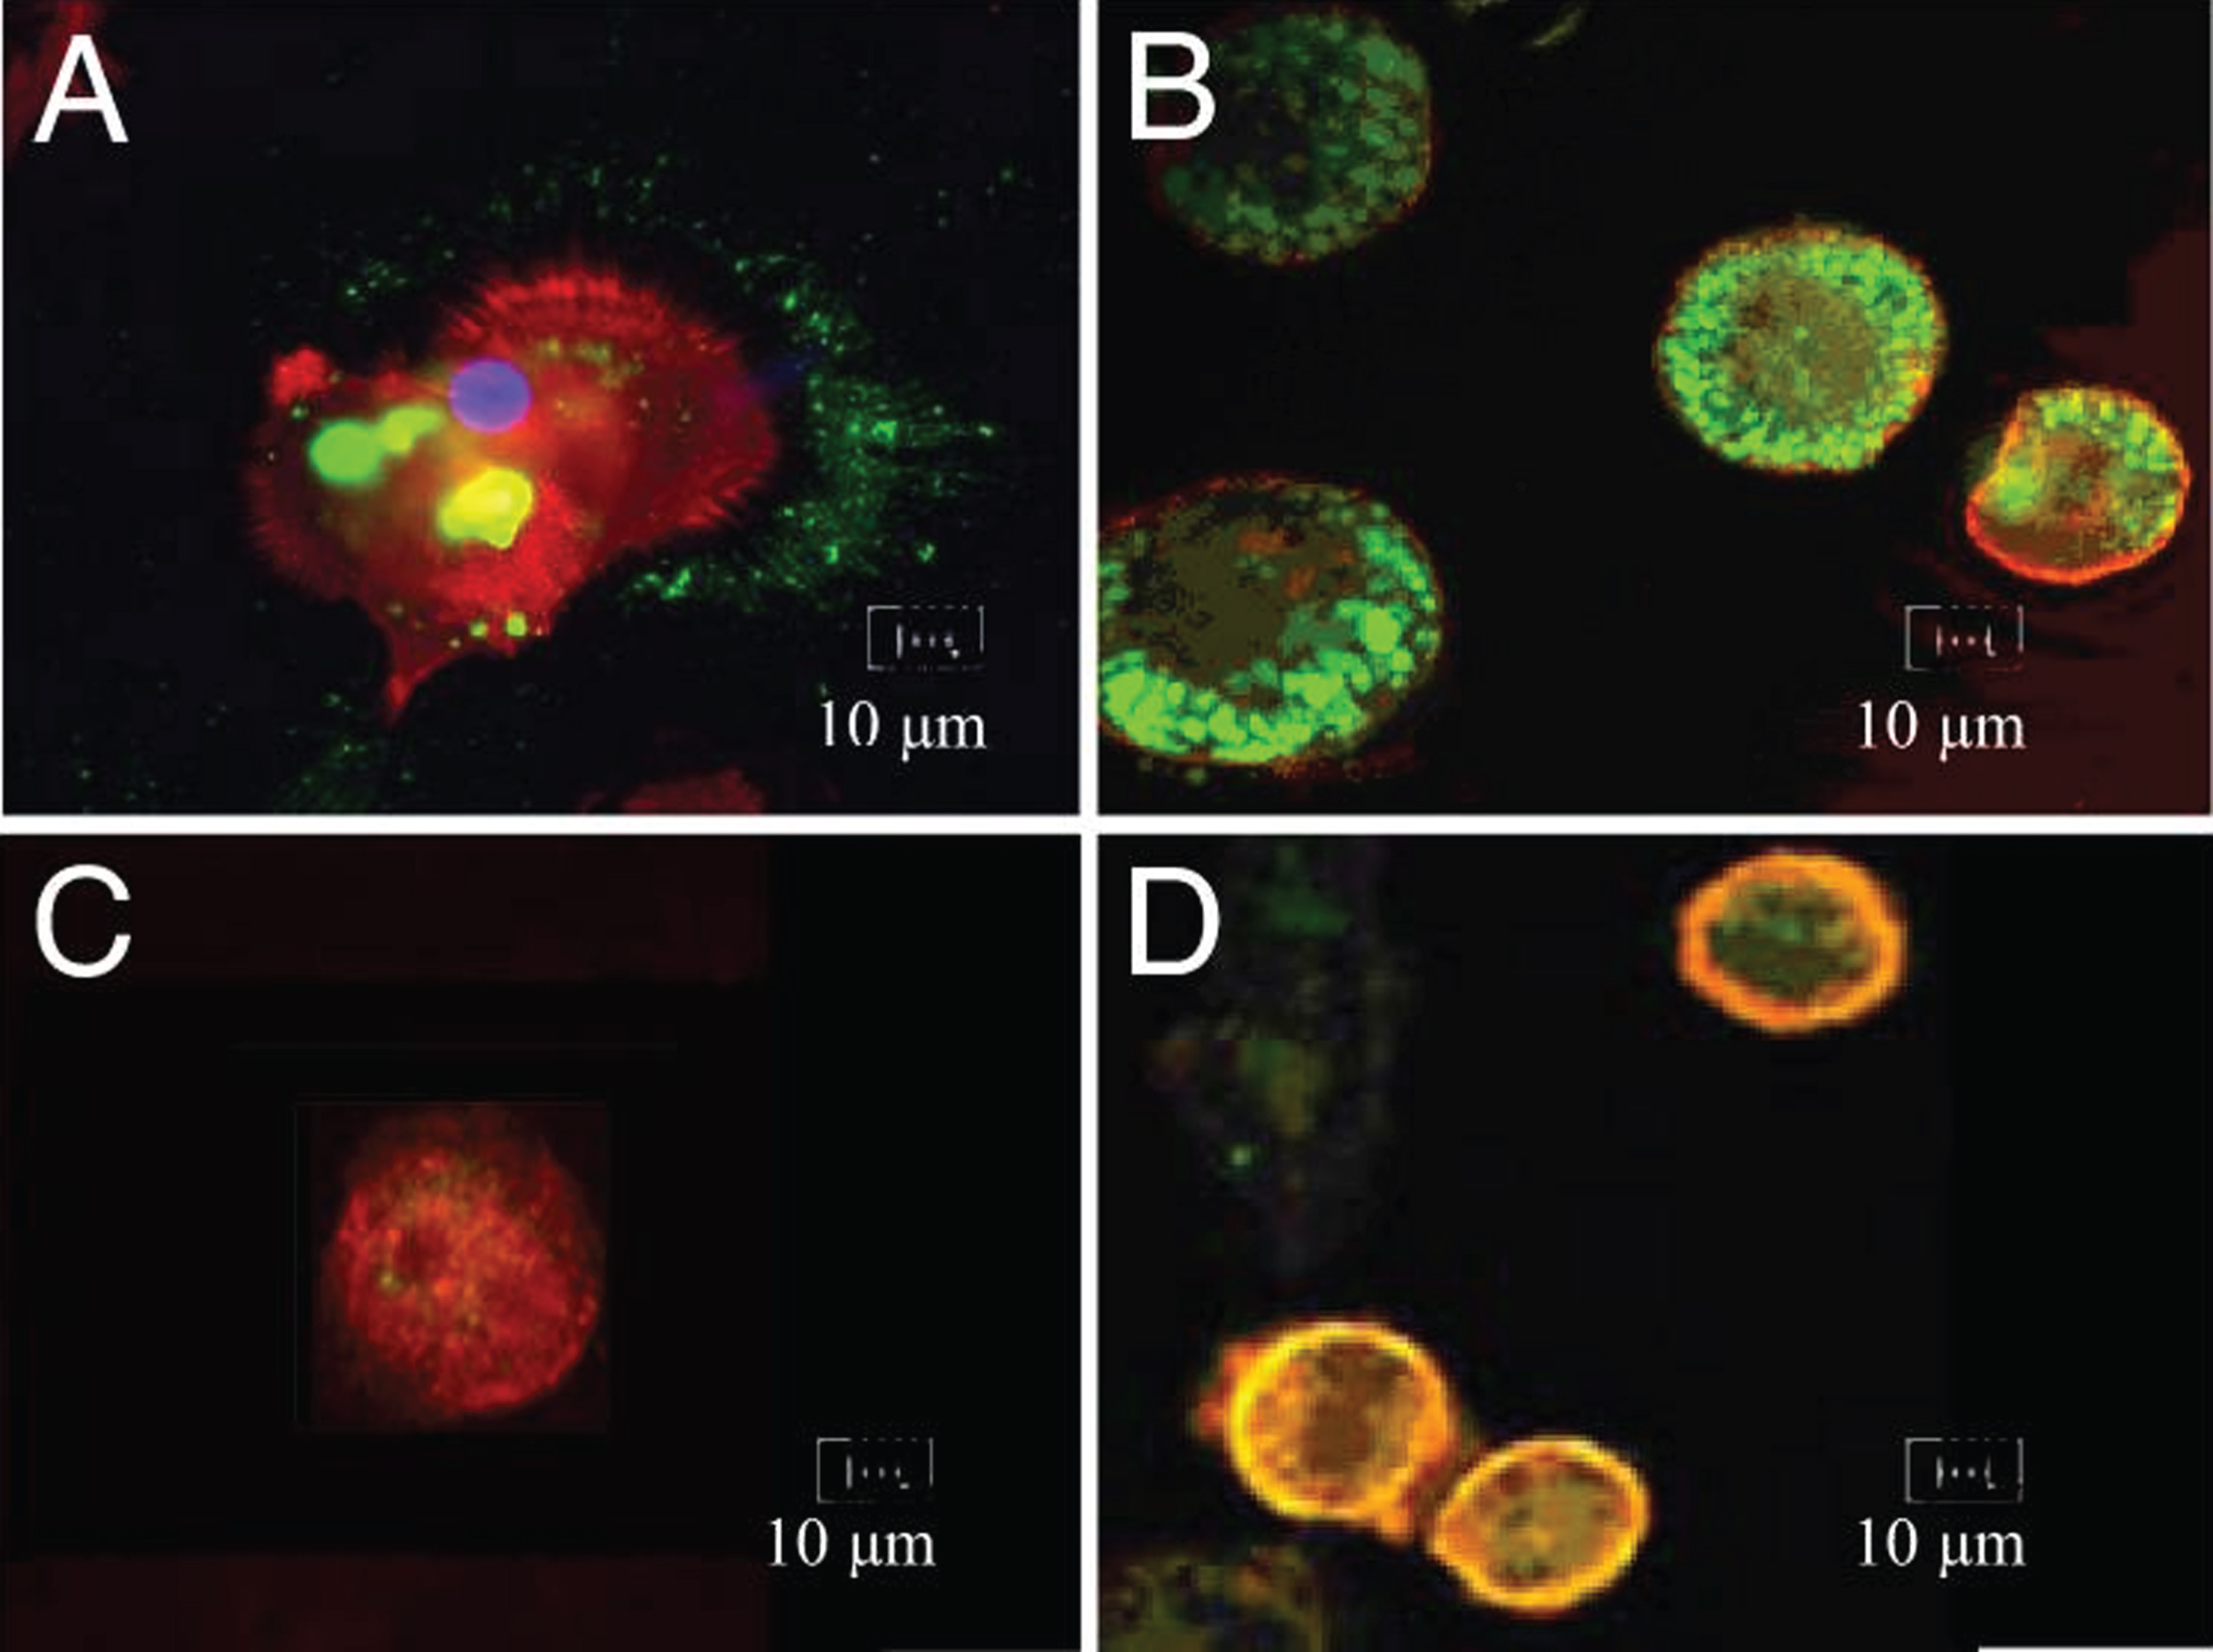 Vigorous phagocytosis of FITC-Aβ (green) by control macrophages (red) (A,B) but no phagocytosis or only surface binding without phagocytosis by AD macrophages (C,D) (from Fiala et al. [2]).